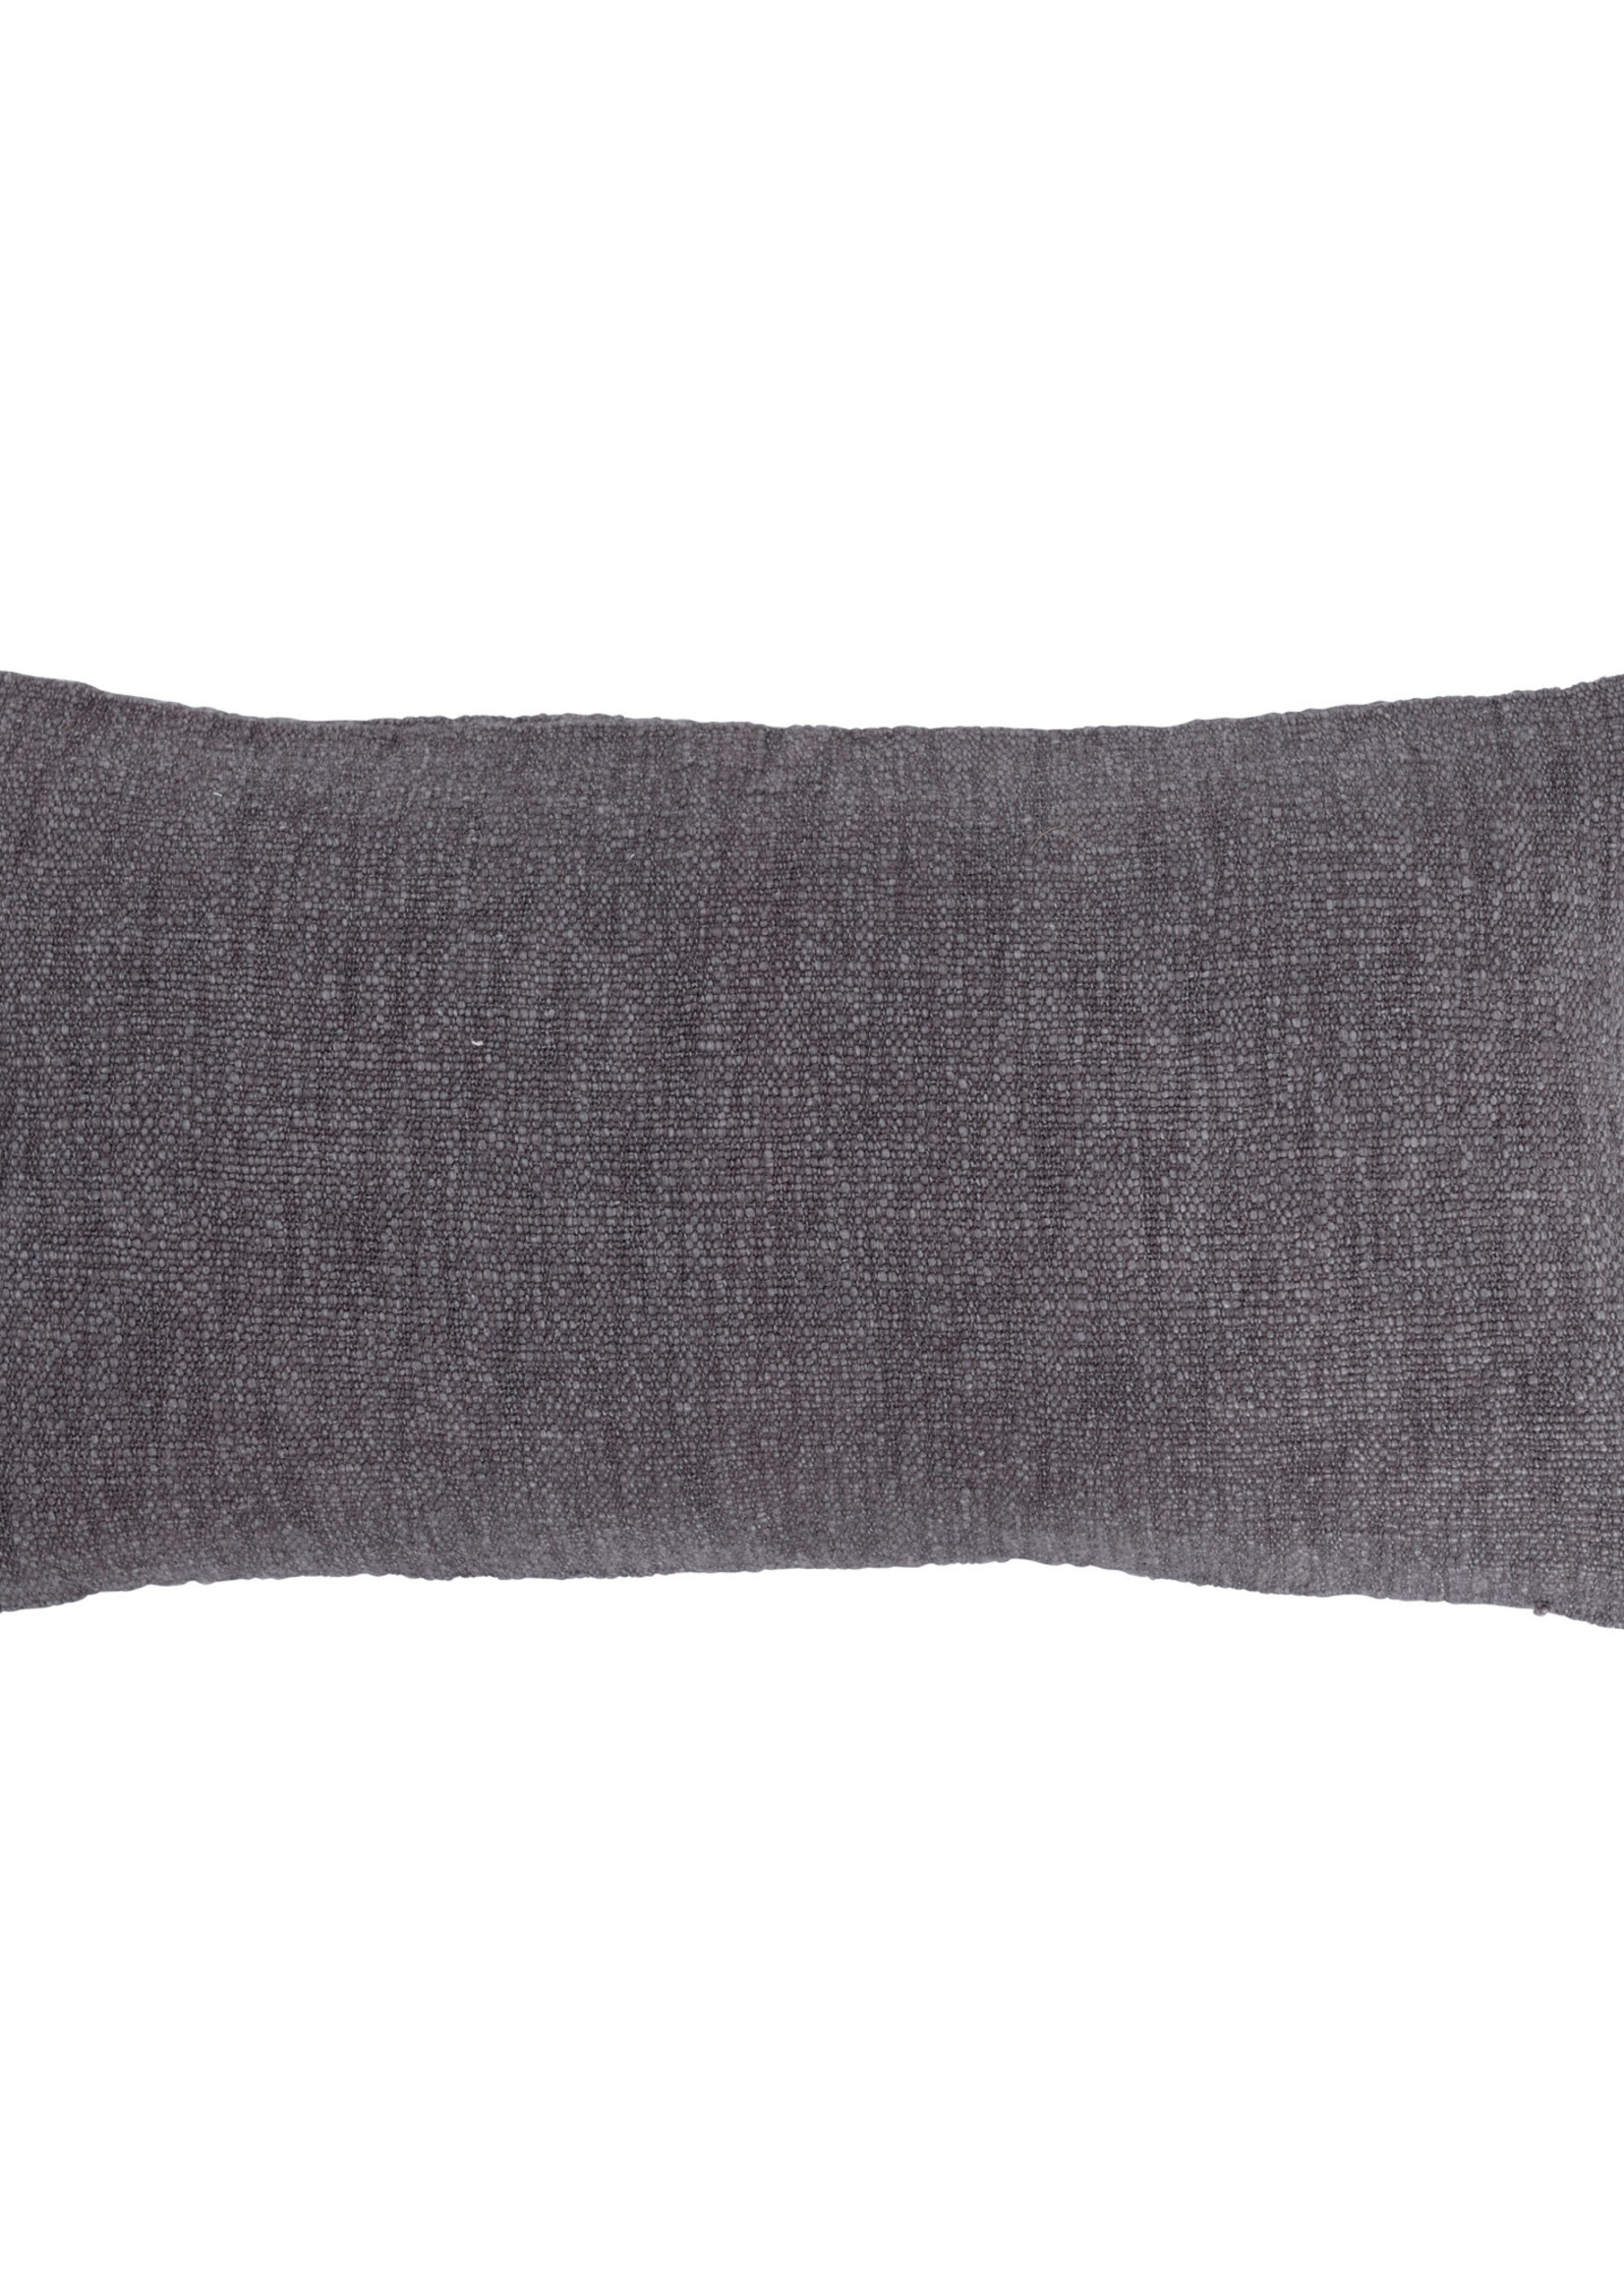 Bloomingville 24" x 12" Cotton Lumbar Pillow with Appliqued Rope & Metallic Embroidery Grey